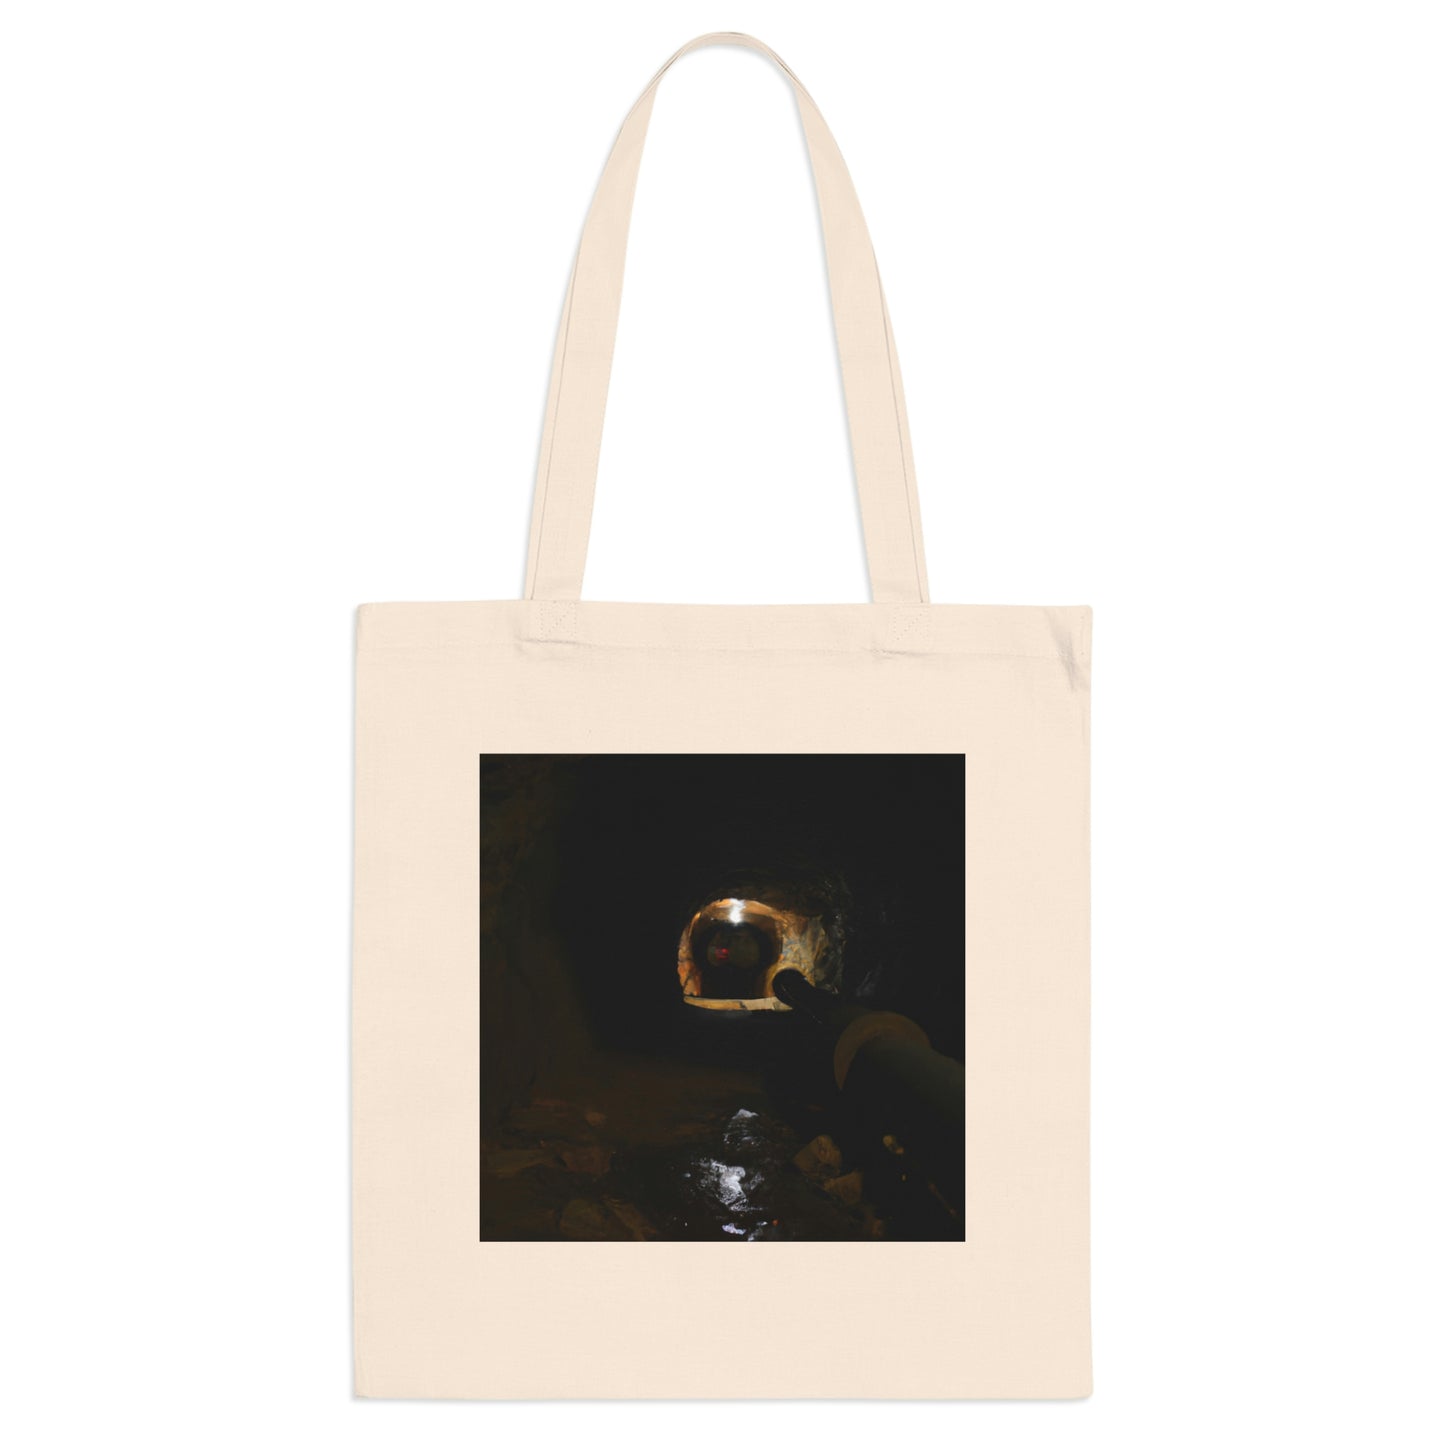 The Mysterious Subterranean Realm - The Alien Tote Bag